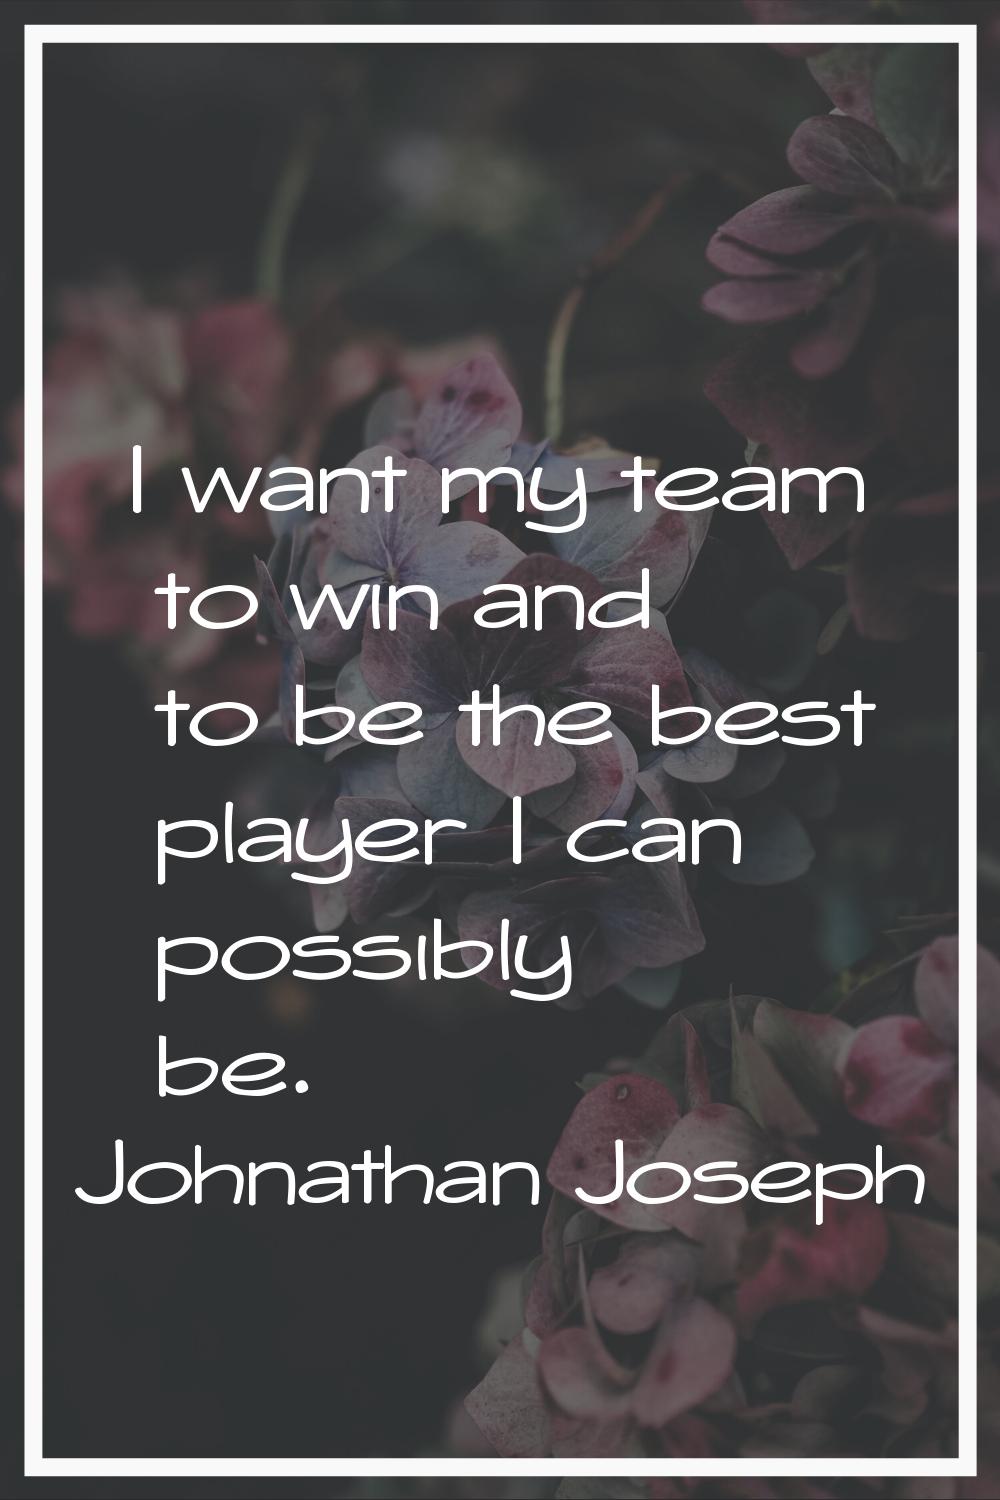 I want my team to win and to be the best player I can possibly be.